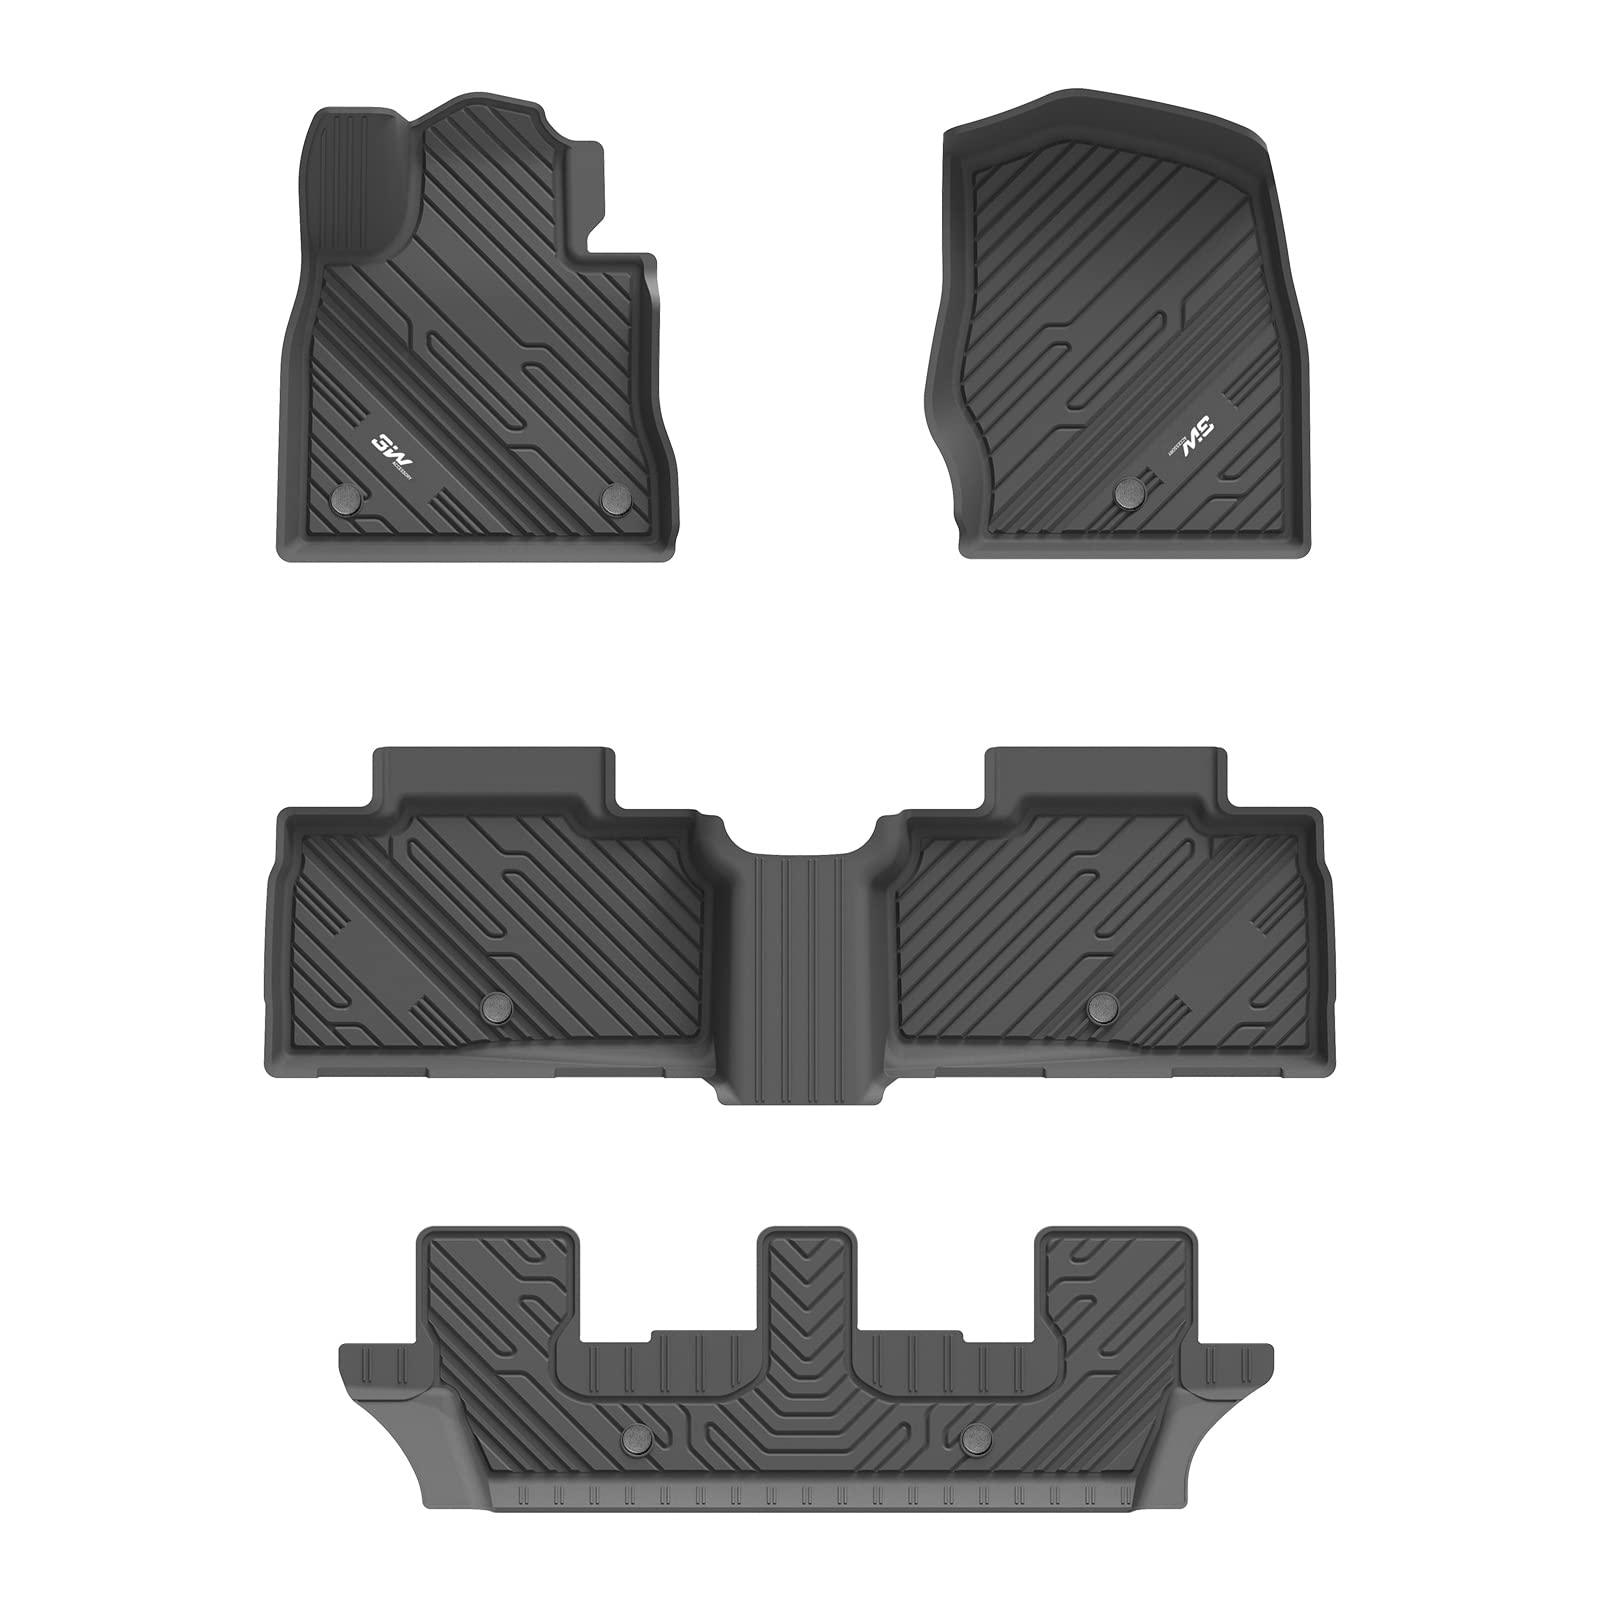 3W Ford Explorer 2020-2023 Custom Floor Mats TPE Material & All-Weather Protection Vehicles & Parts 3Wliners 2020-2023 7 Seat Explorer 2020-2023 1st&2nd&3rd Row Mats